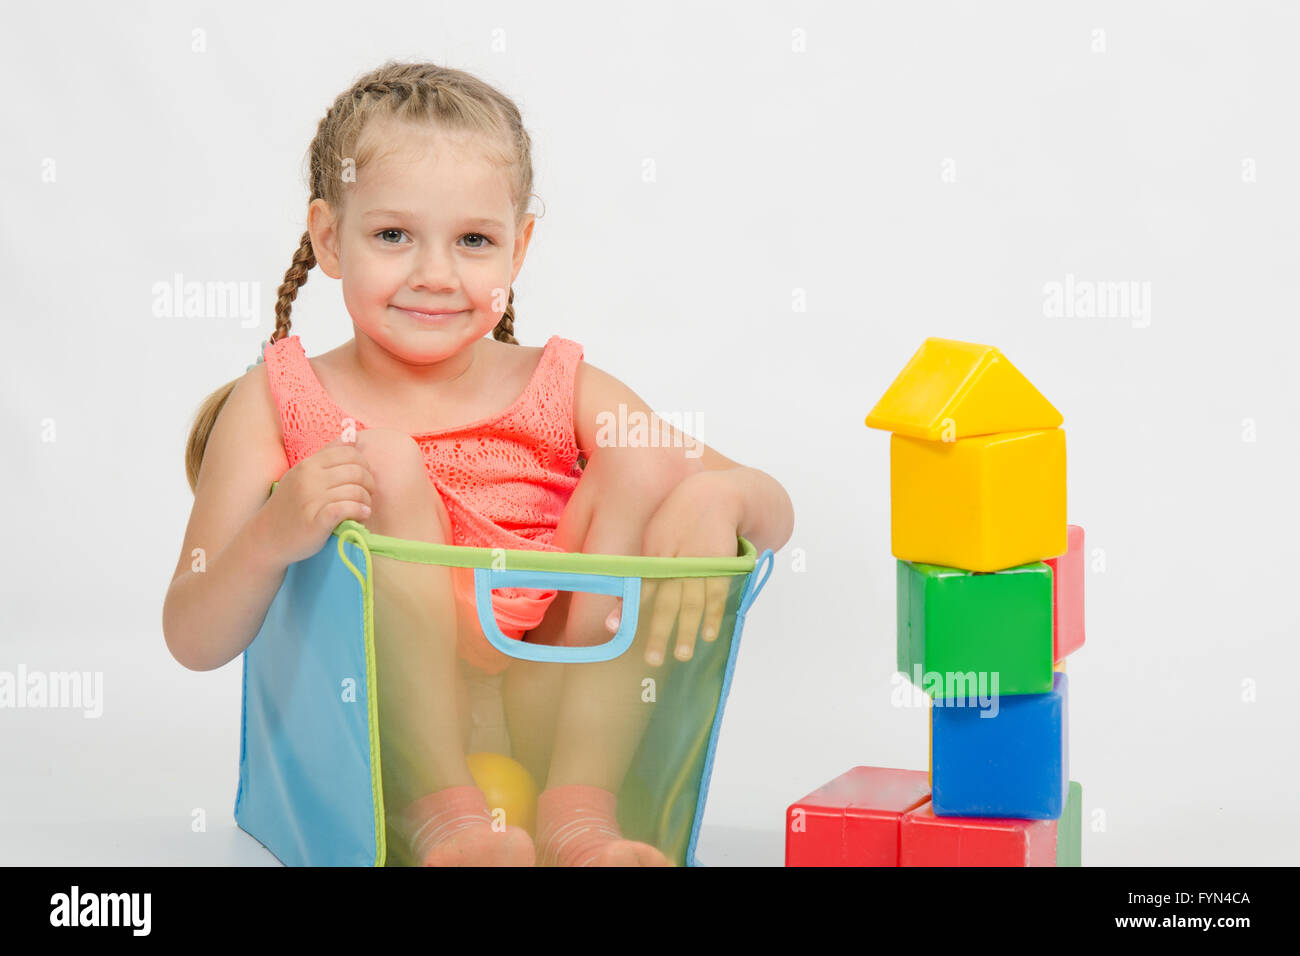 The girl climbed into a box for toys Stock Photo